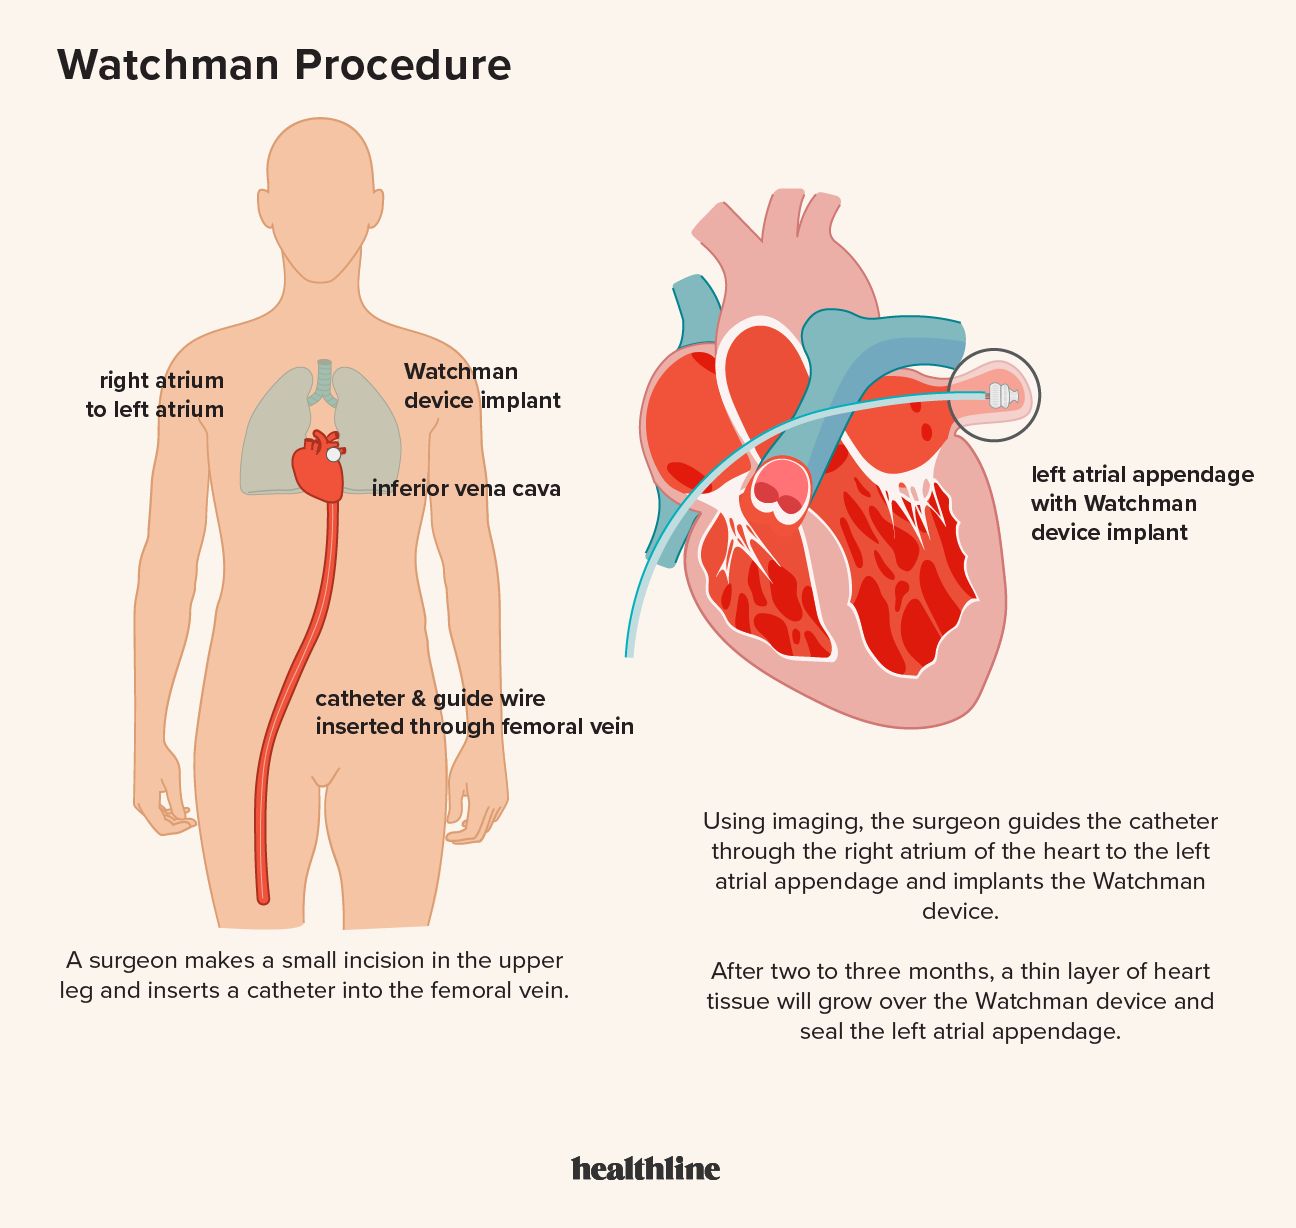 Illustration showing how a Watchman device is implanted